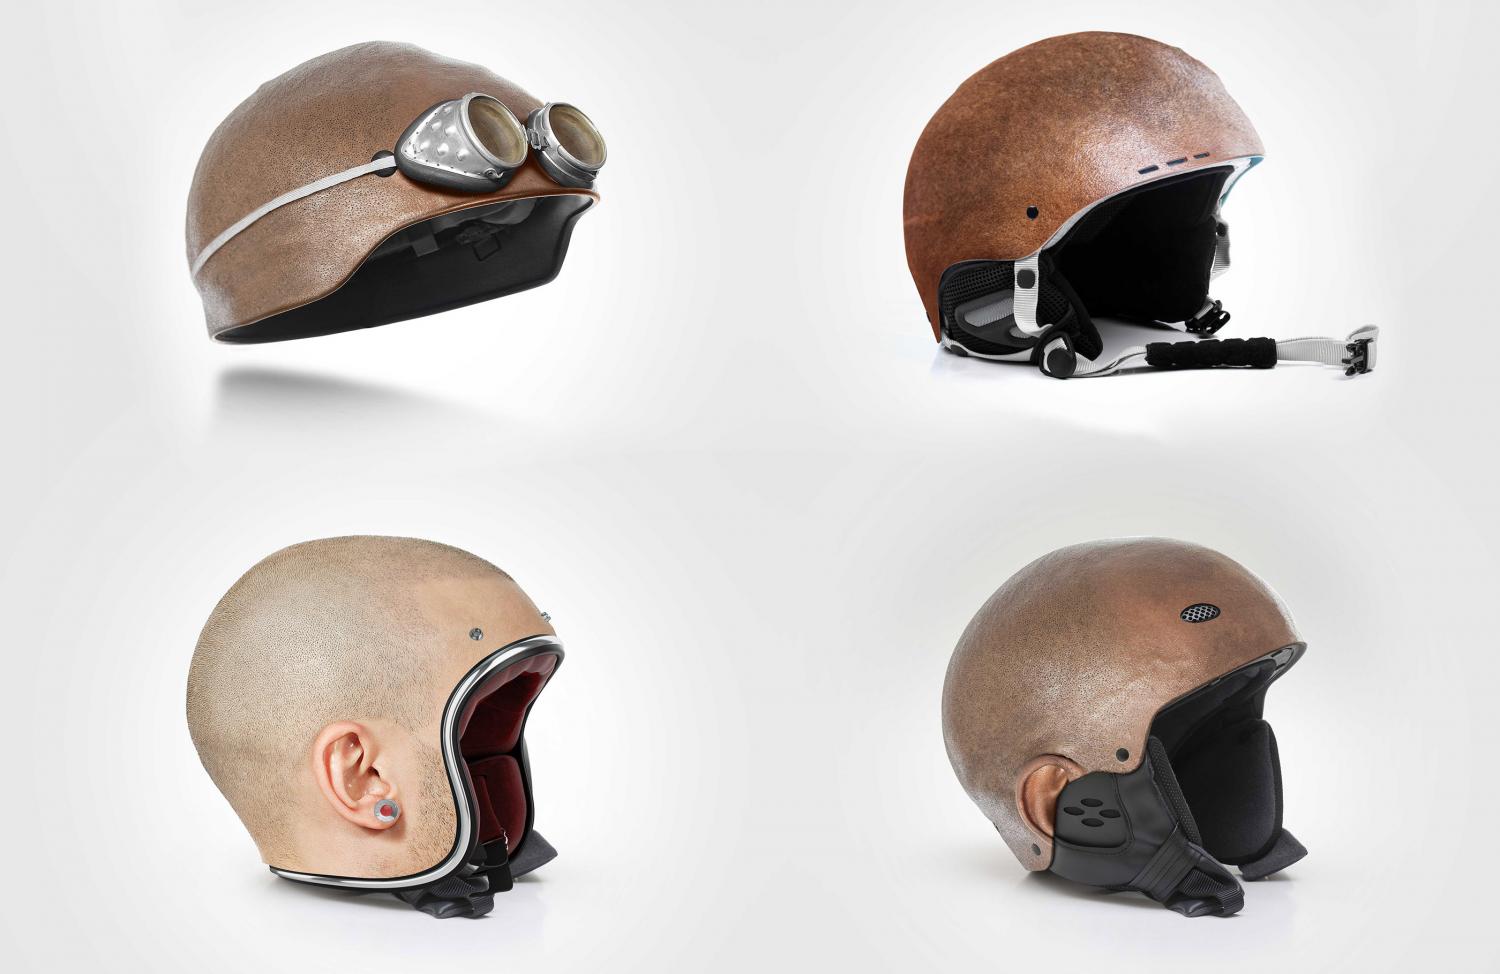 Motorcycle Helmets That Are Modeled After Actual Human Heads - Creepy Bald Human Head Bike Helmets